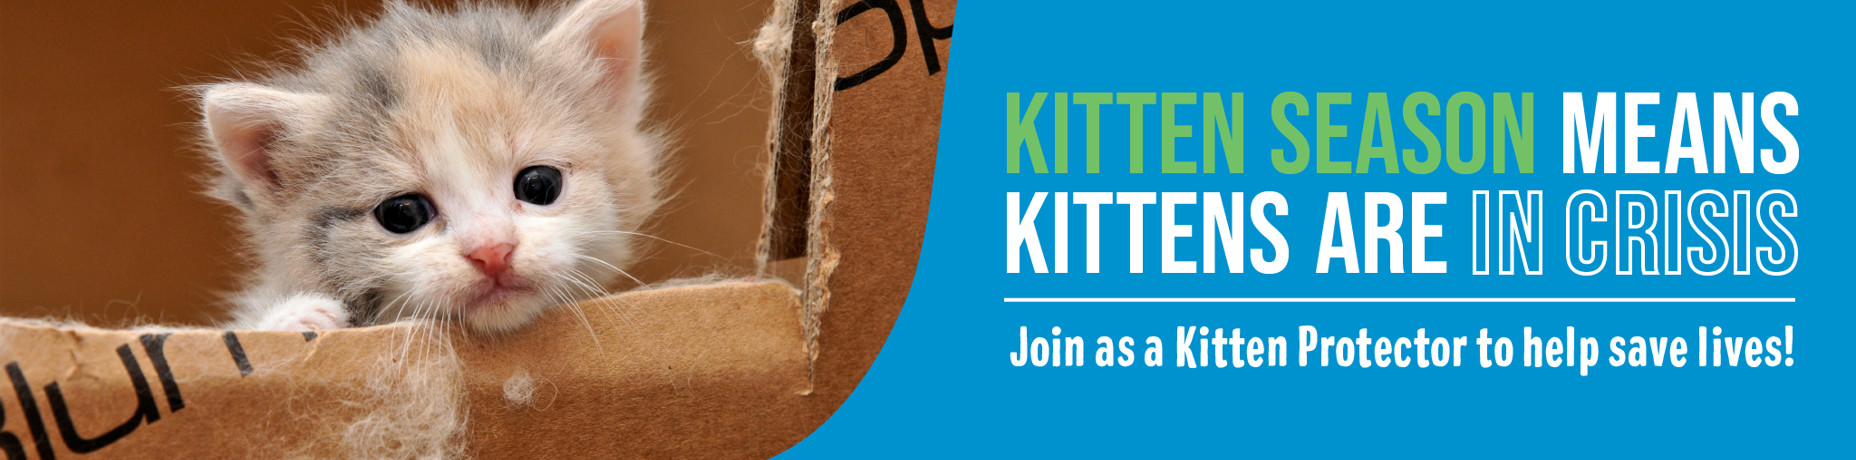 Kitten season means kittens are in crisis - Join as a Kitten Protector to help save lives!